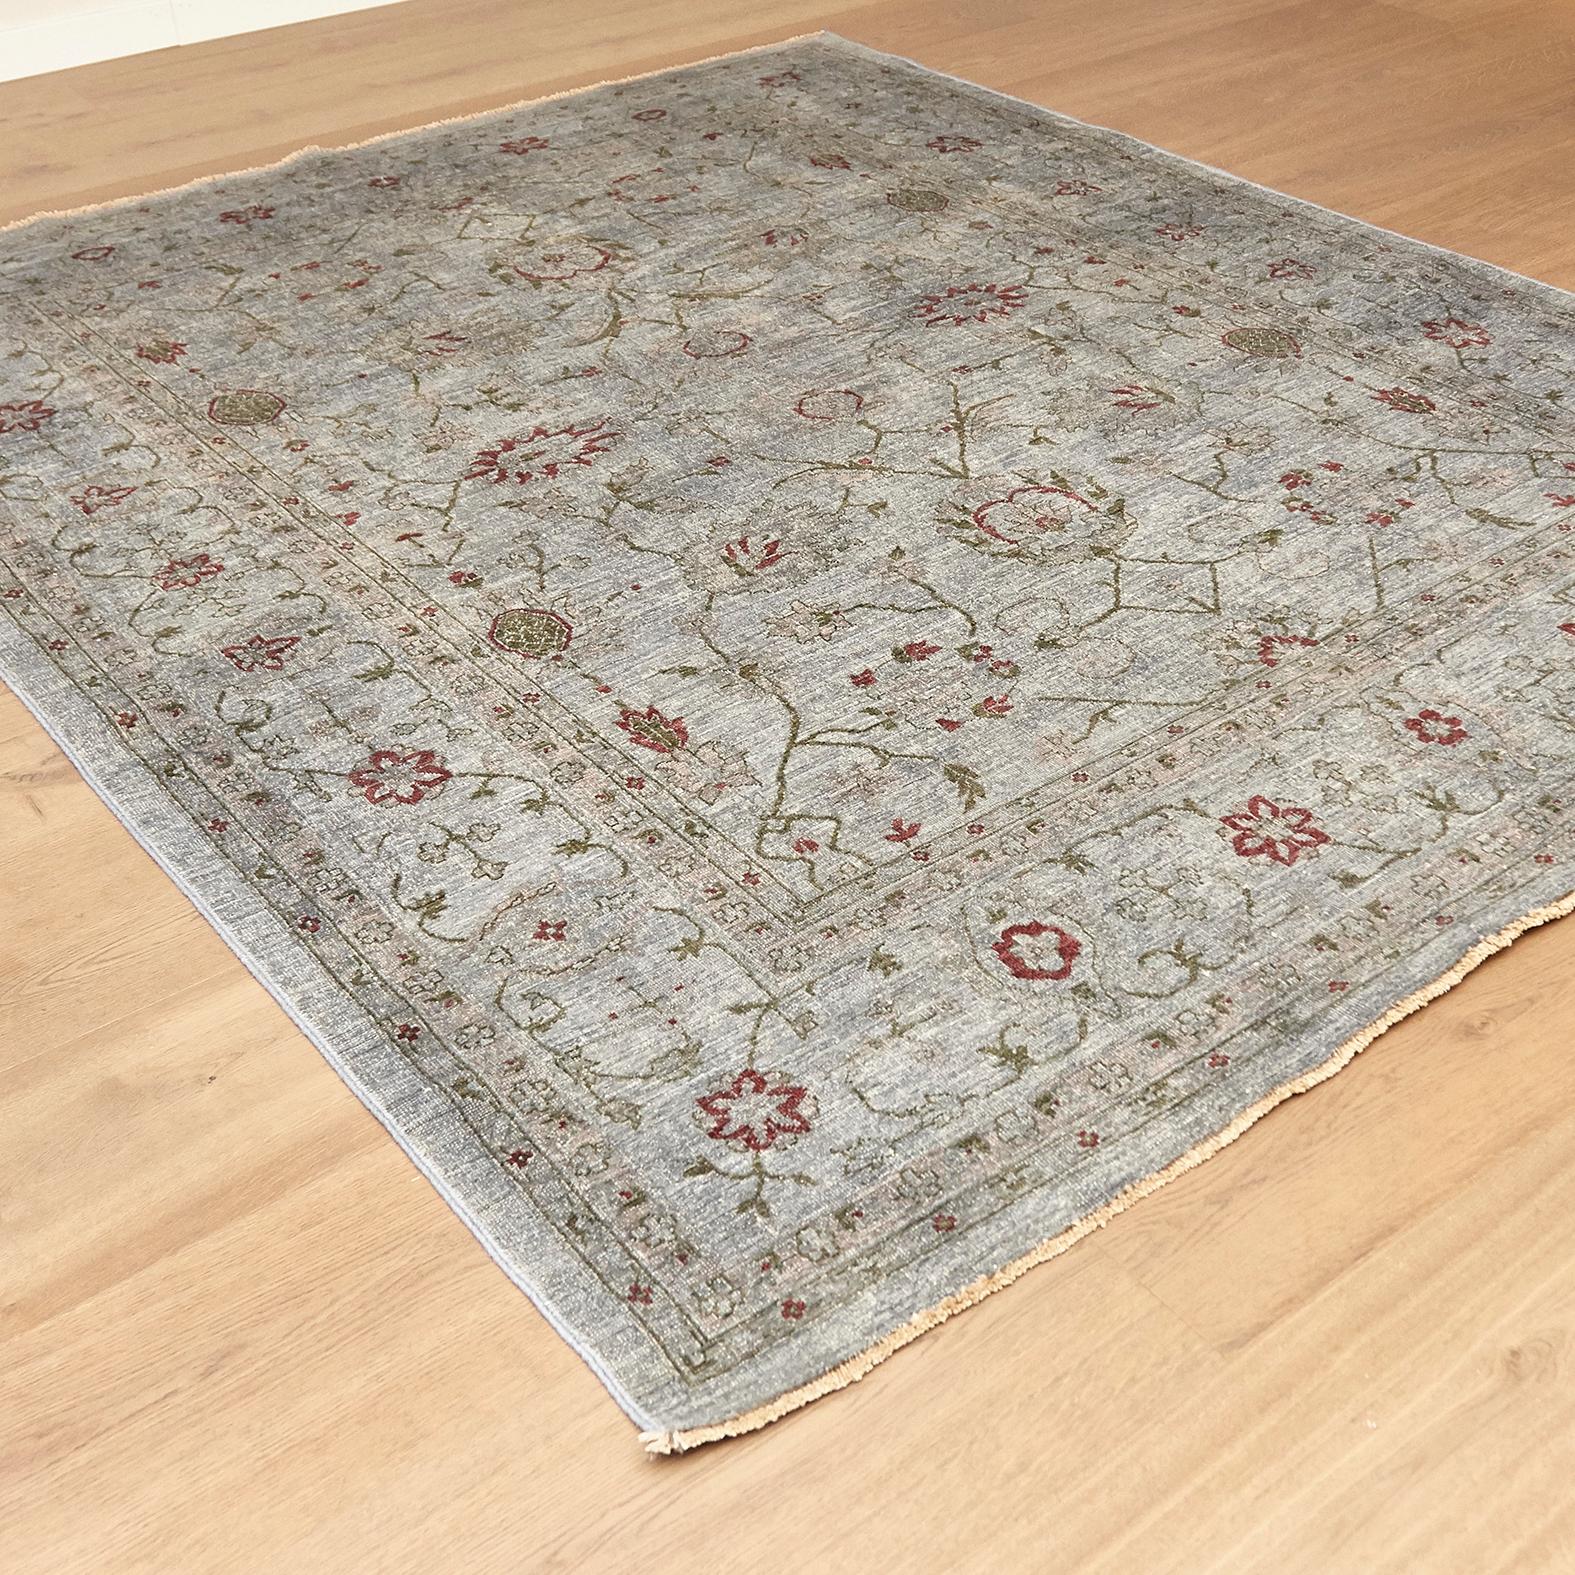 Ziegler rug made in Pakistan, circa 2000.

Hand knotted.
Stone washed

Measures: 235 x 291.

70966.